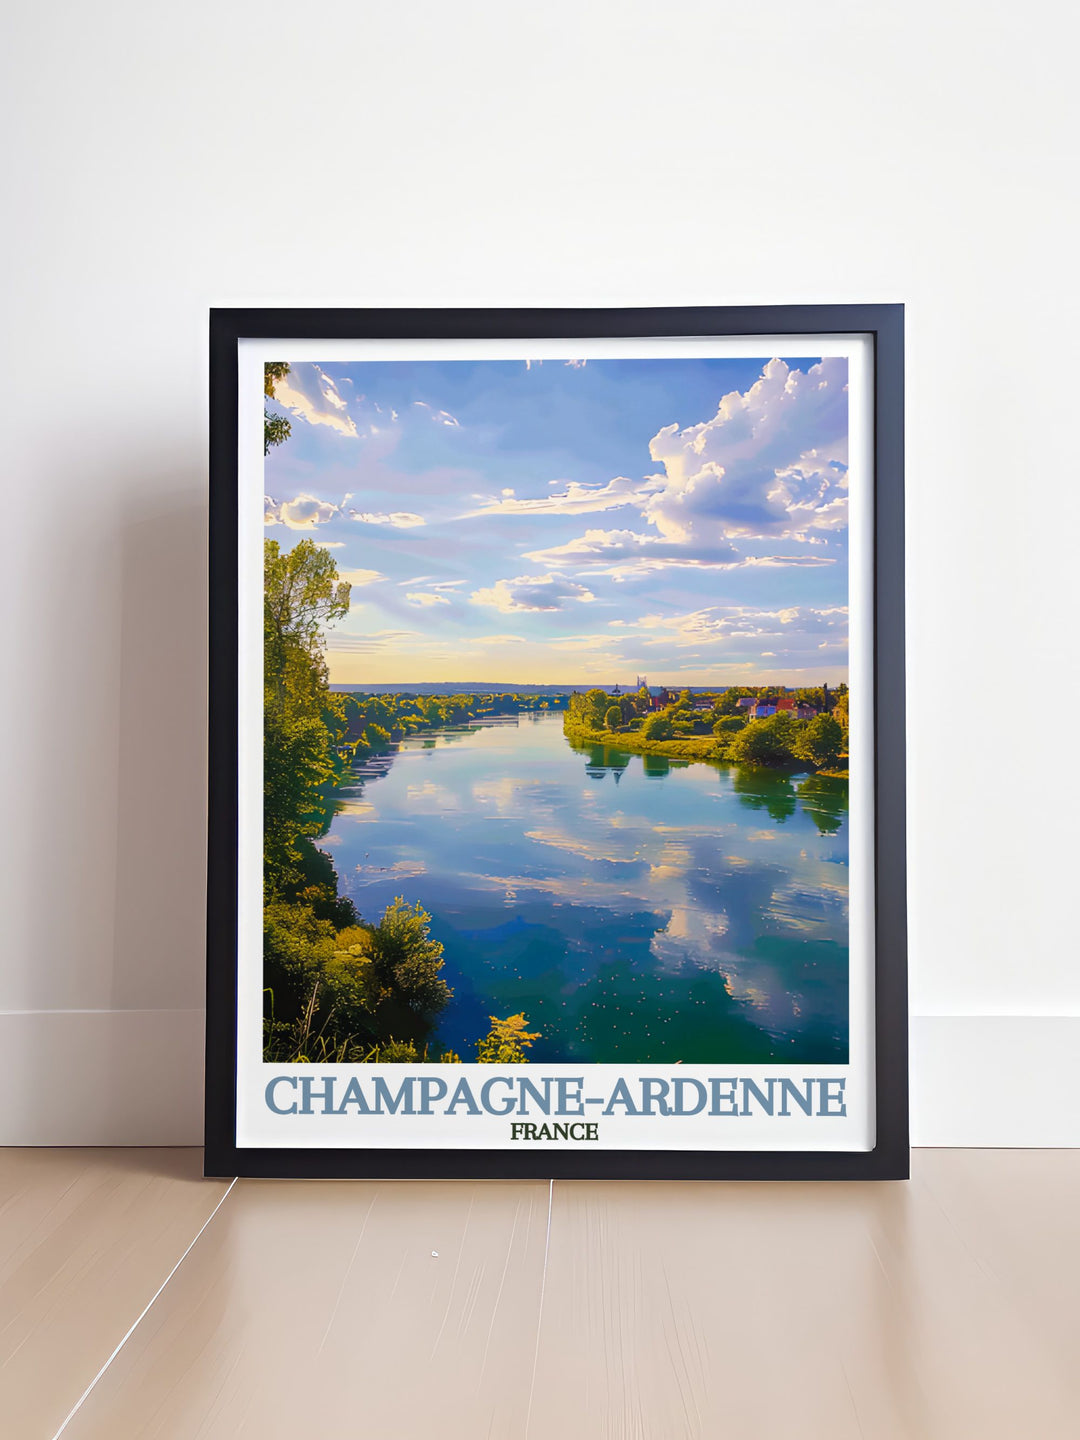 Beautiful Marne River travel poster featuring the tranquil flow of the river and picturesque French countryside. This vintage print is a perfect addition to any home decor, bringing the timeless elegance of France into your living space.